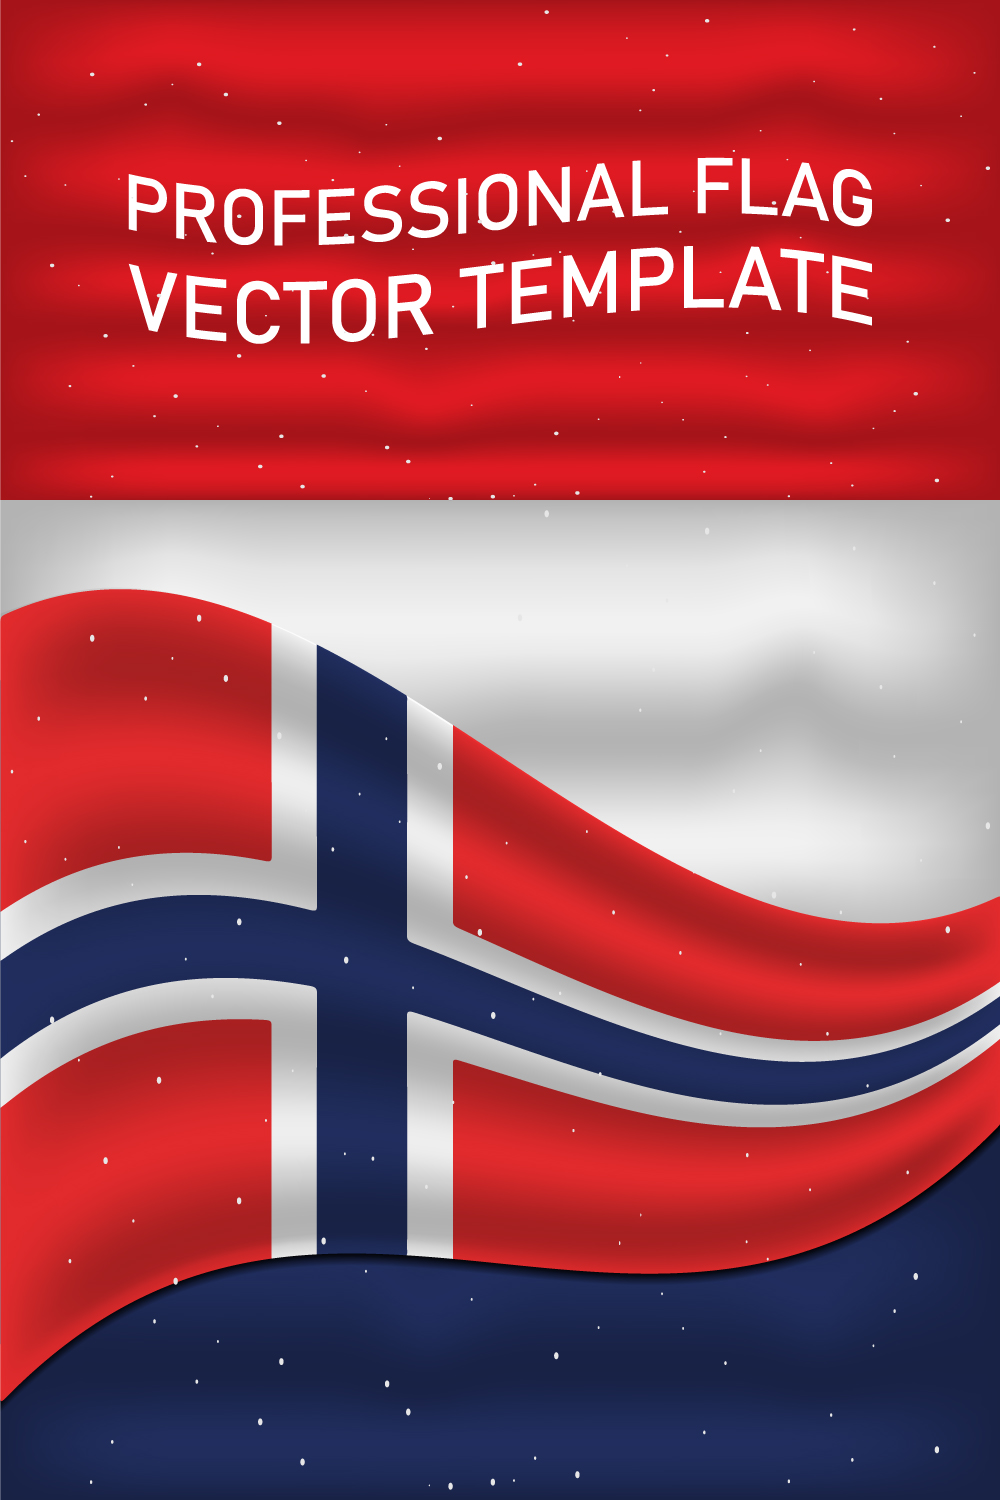 Charming image of the flag of Norway.